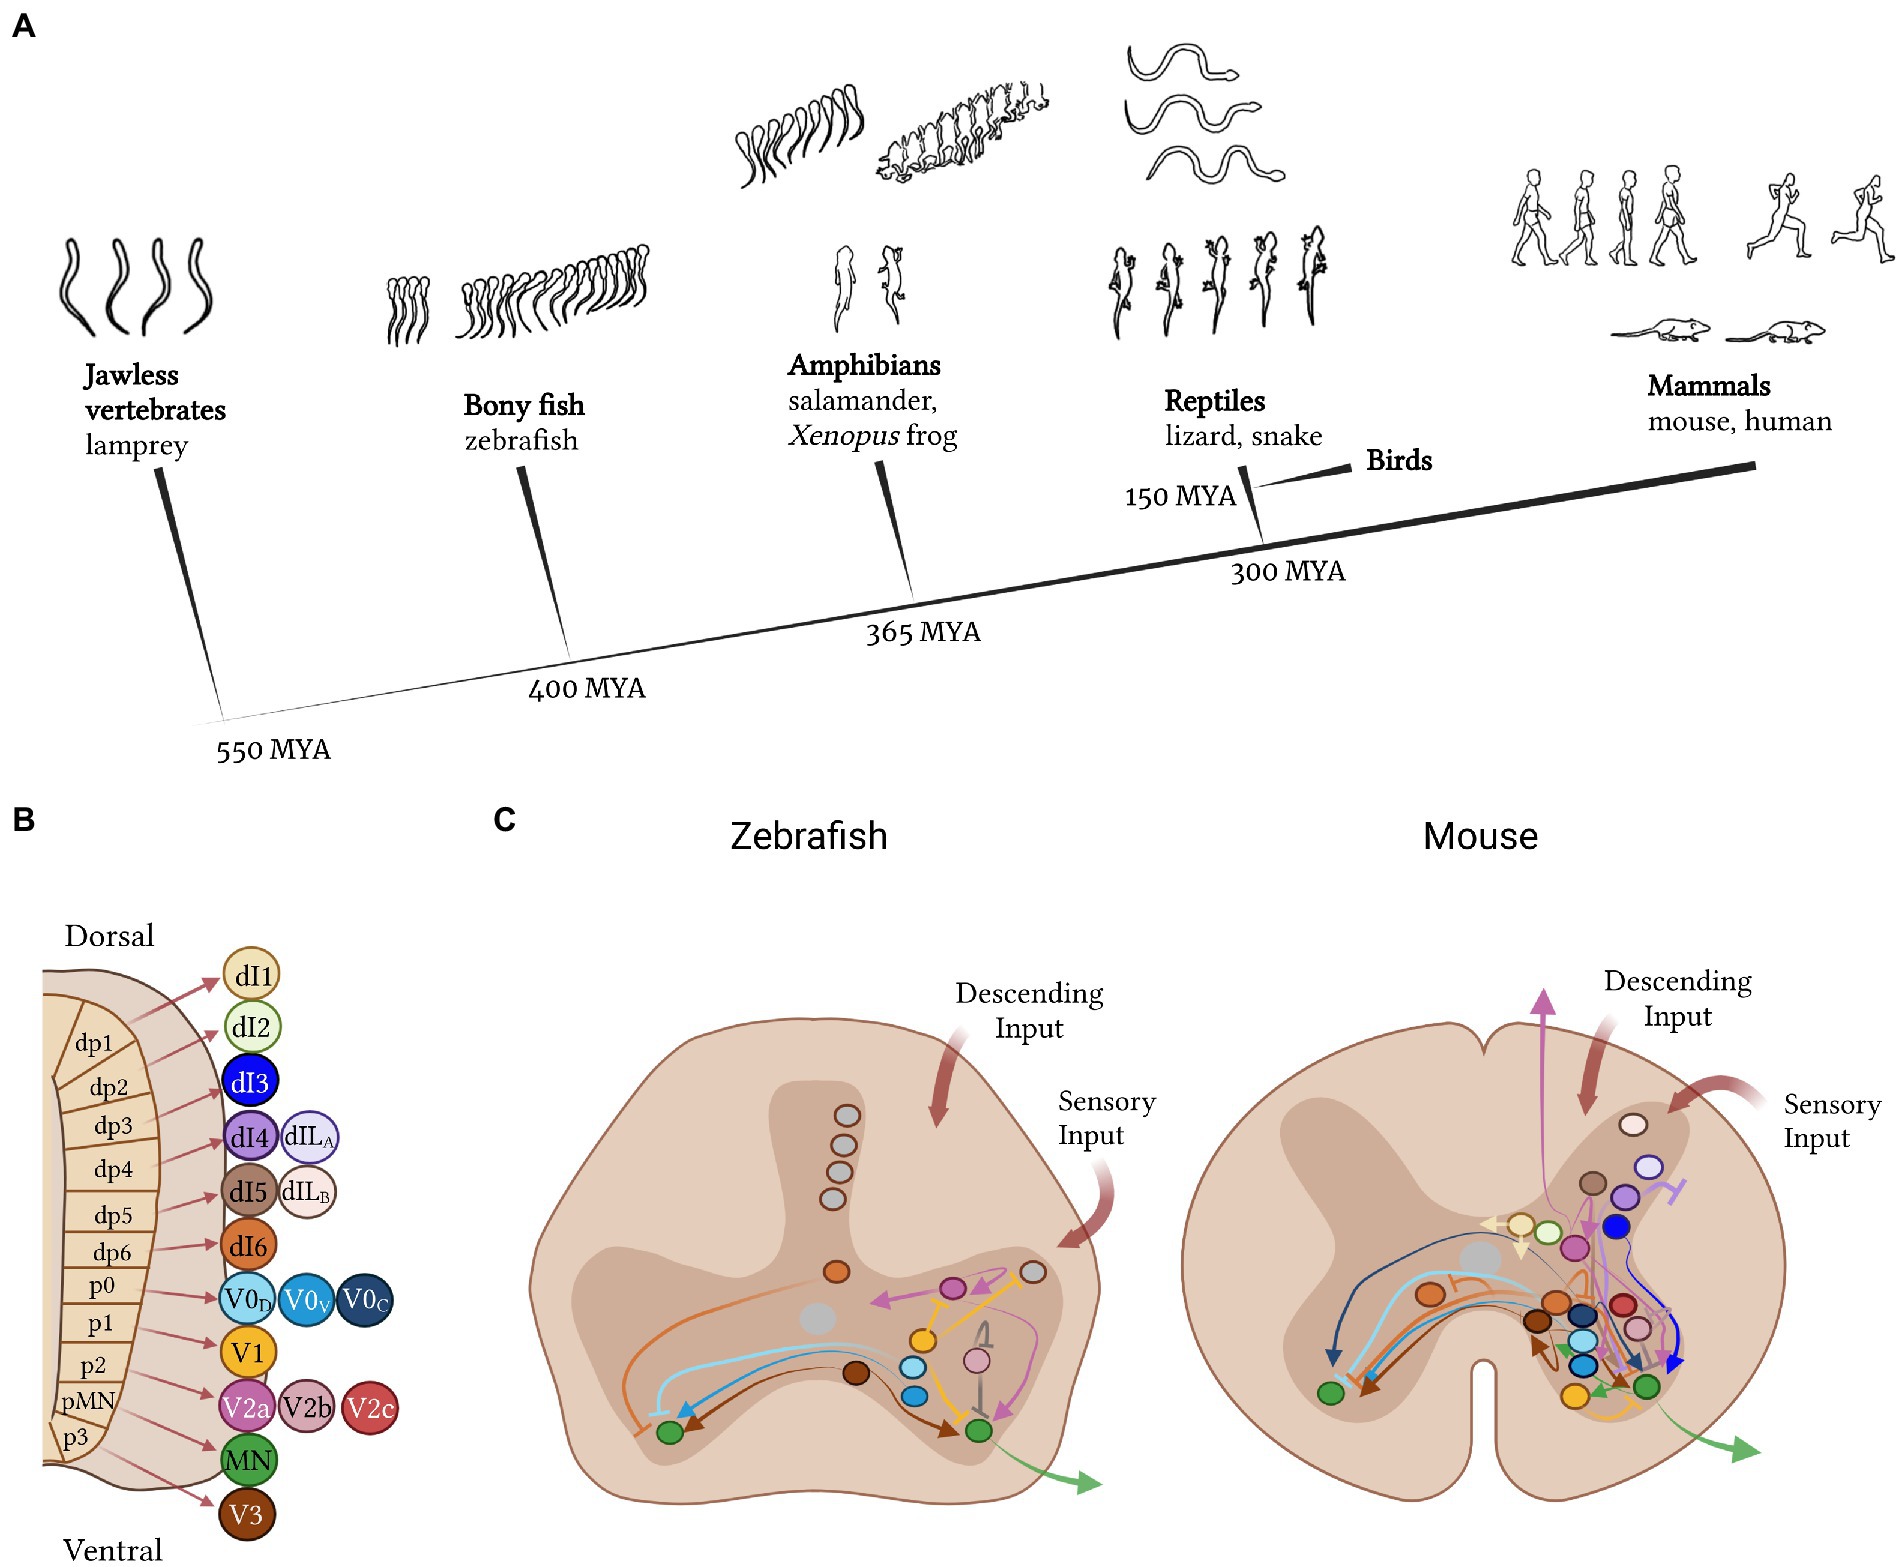 Frontiers  Spinal cords: Symphonies of interneurons across species